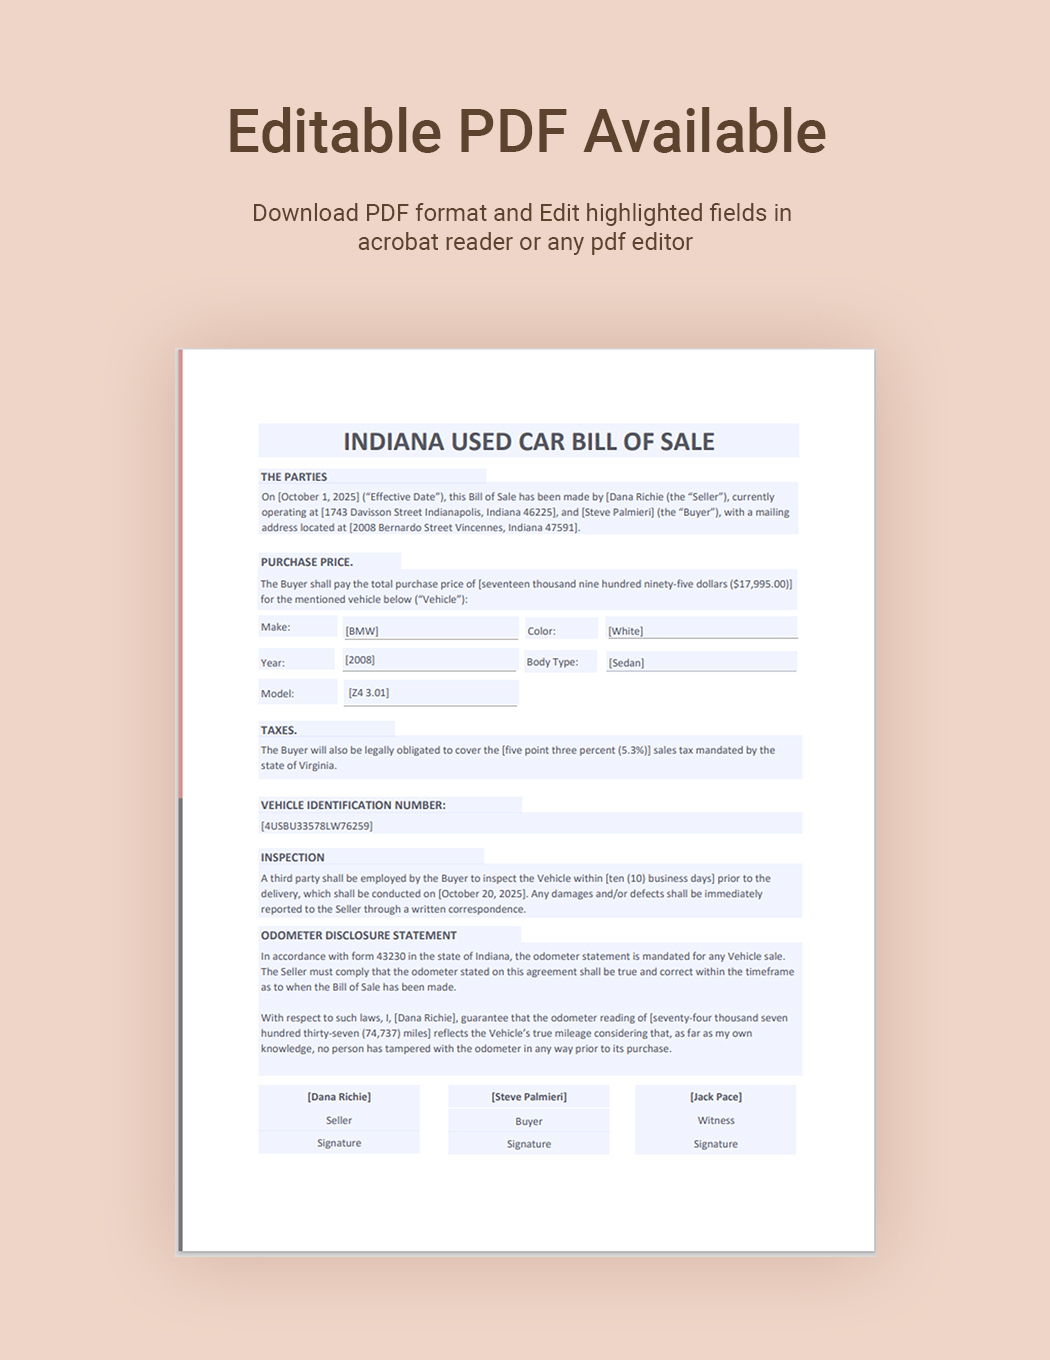 Indiana Used Car Bill of Sale Template